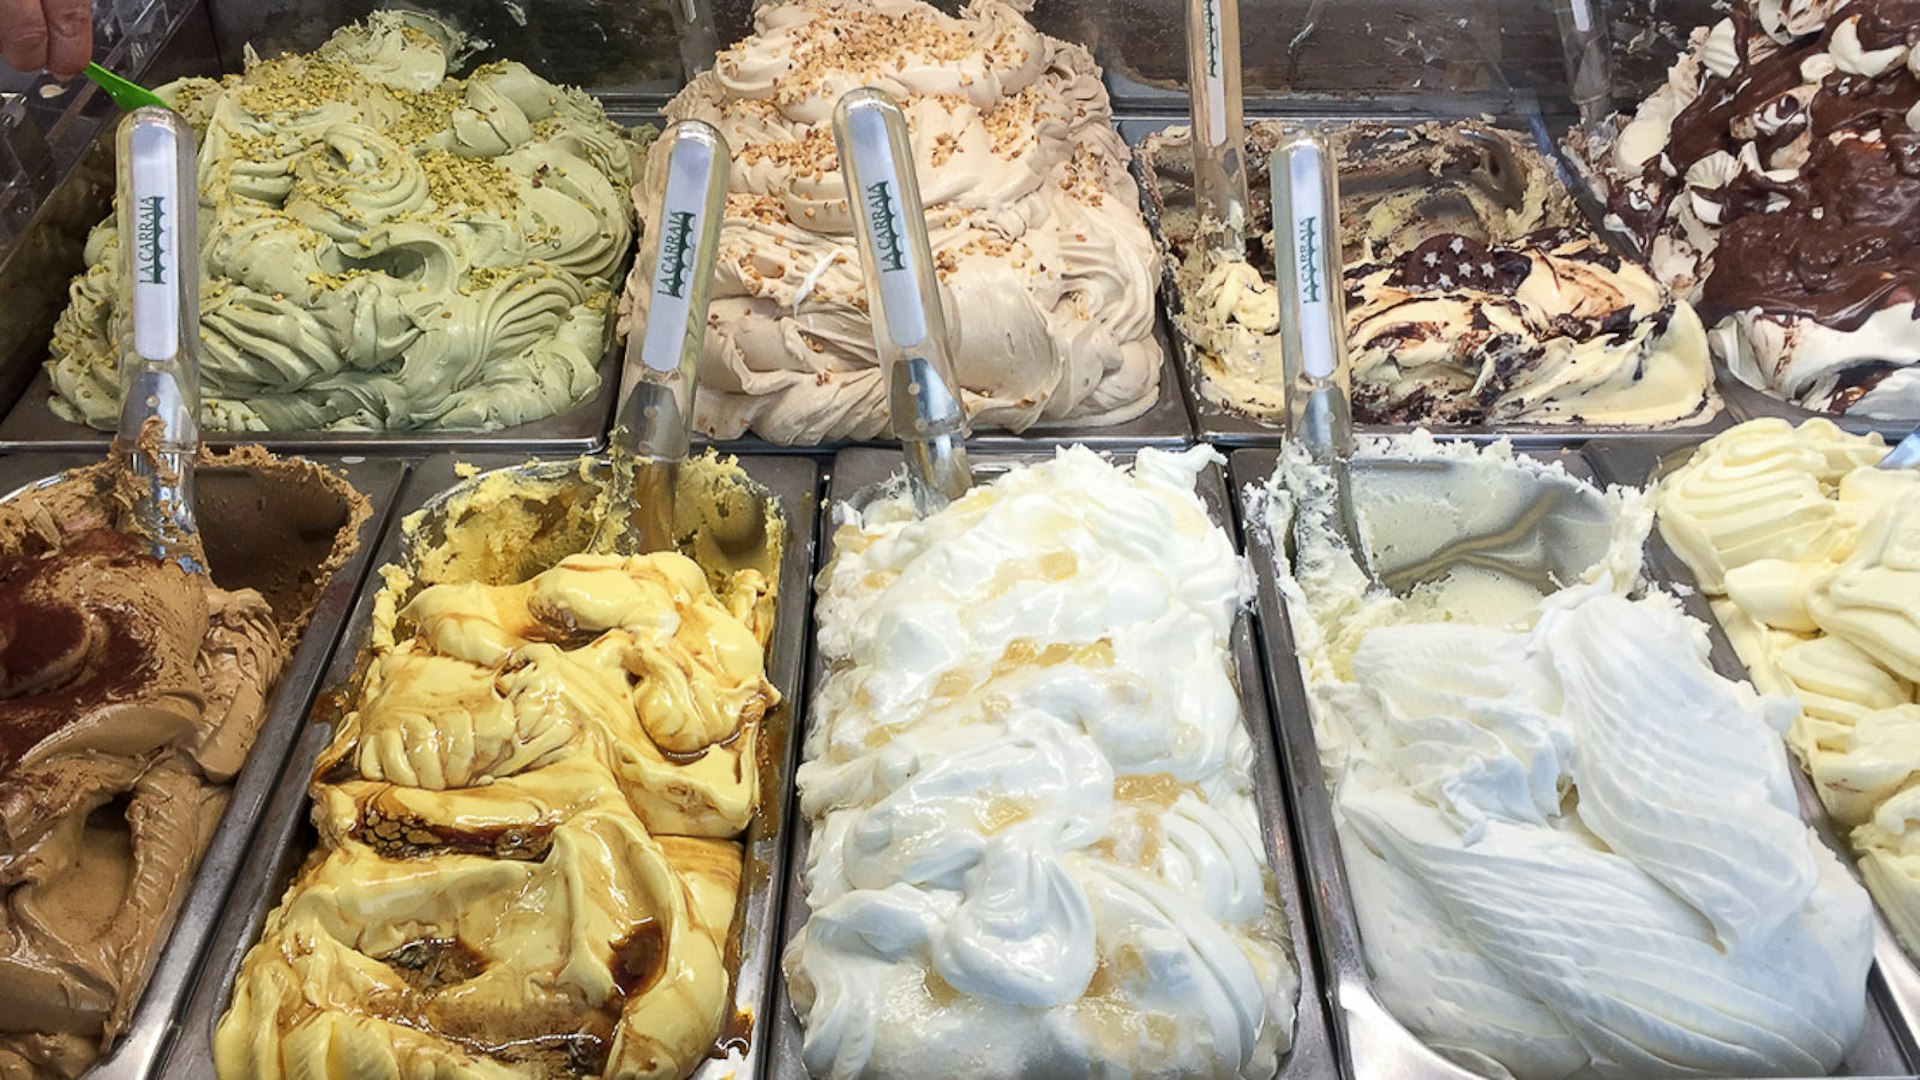 Ricotta, pear and plenty of other delicious flavours at La Carraia